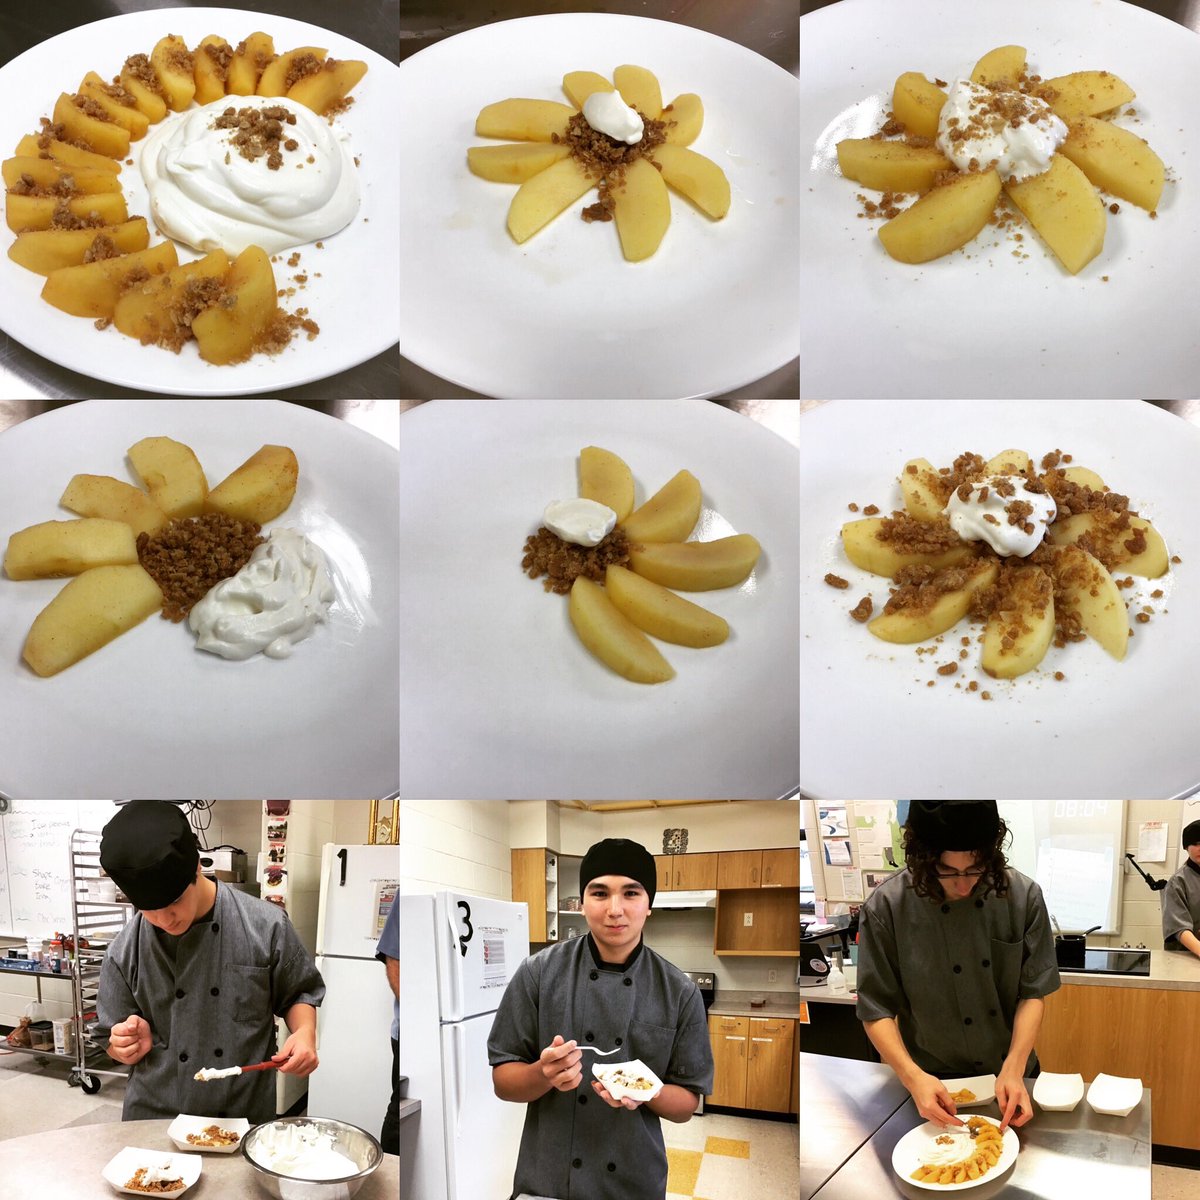 Poached Apples w/ brown sugar crumble and vanilla whipped cream. Lots of skill practice in CE this week! #poaching #plating #timemanagement #homemadewhippedcream #jagculinary